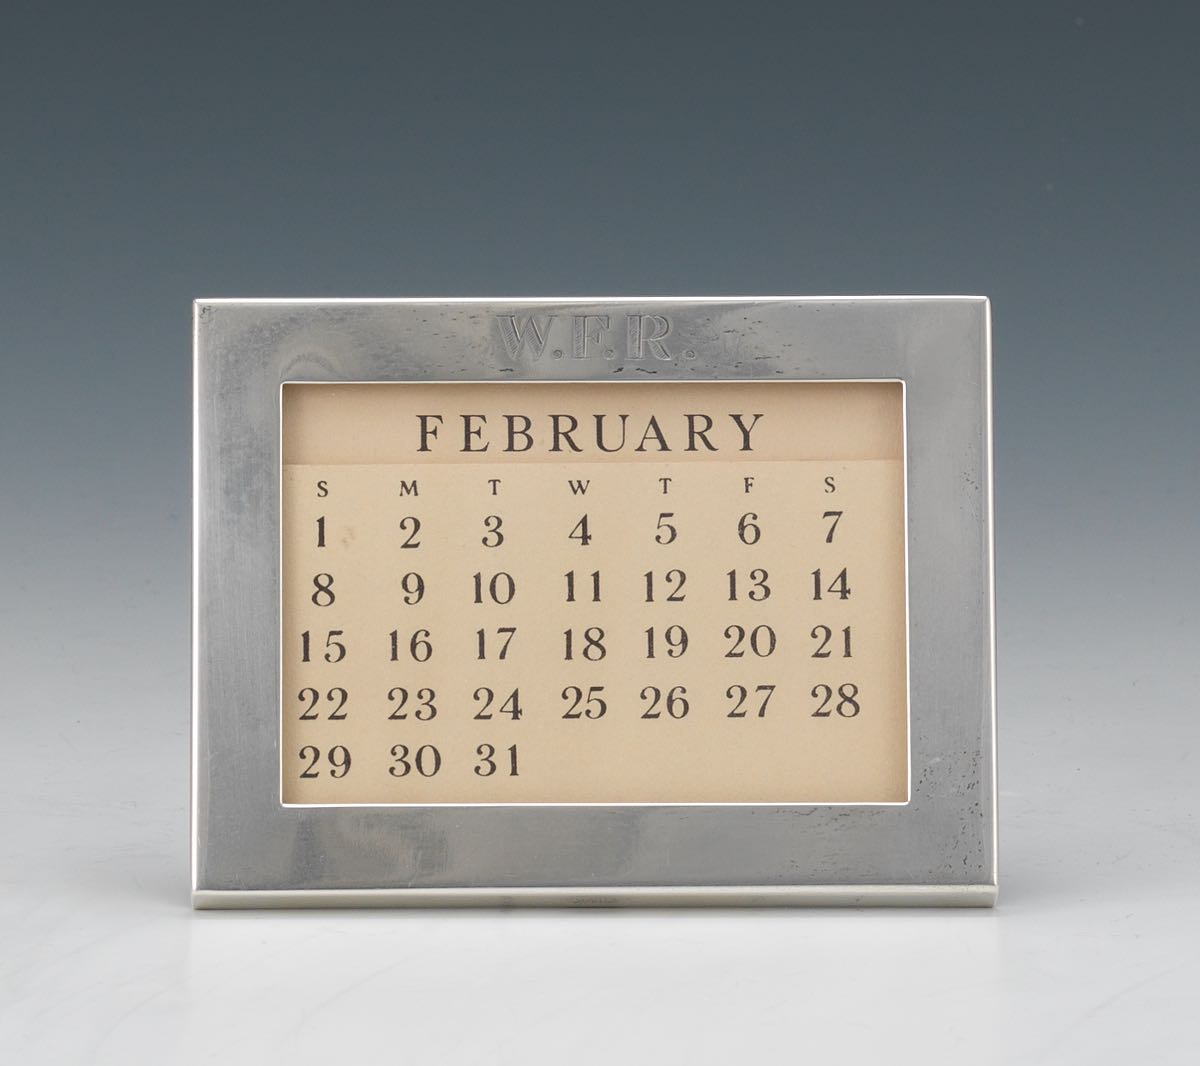 Tiffany & Co. Sterling Silver Perpetual Calendar Frame, 02.19.15, Sold 69